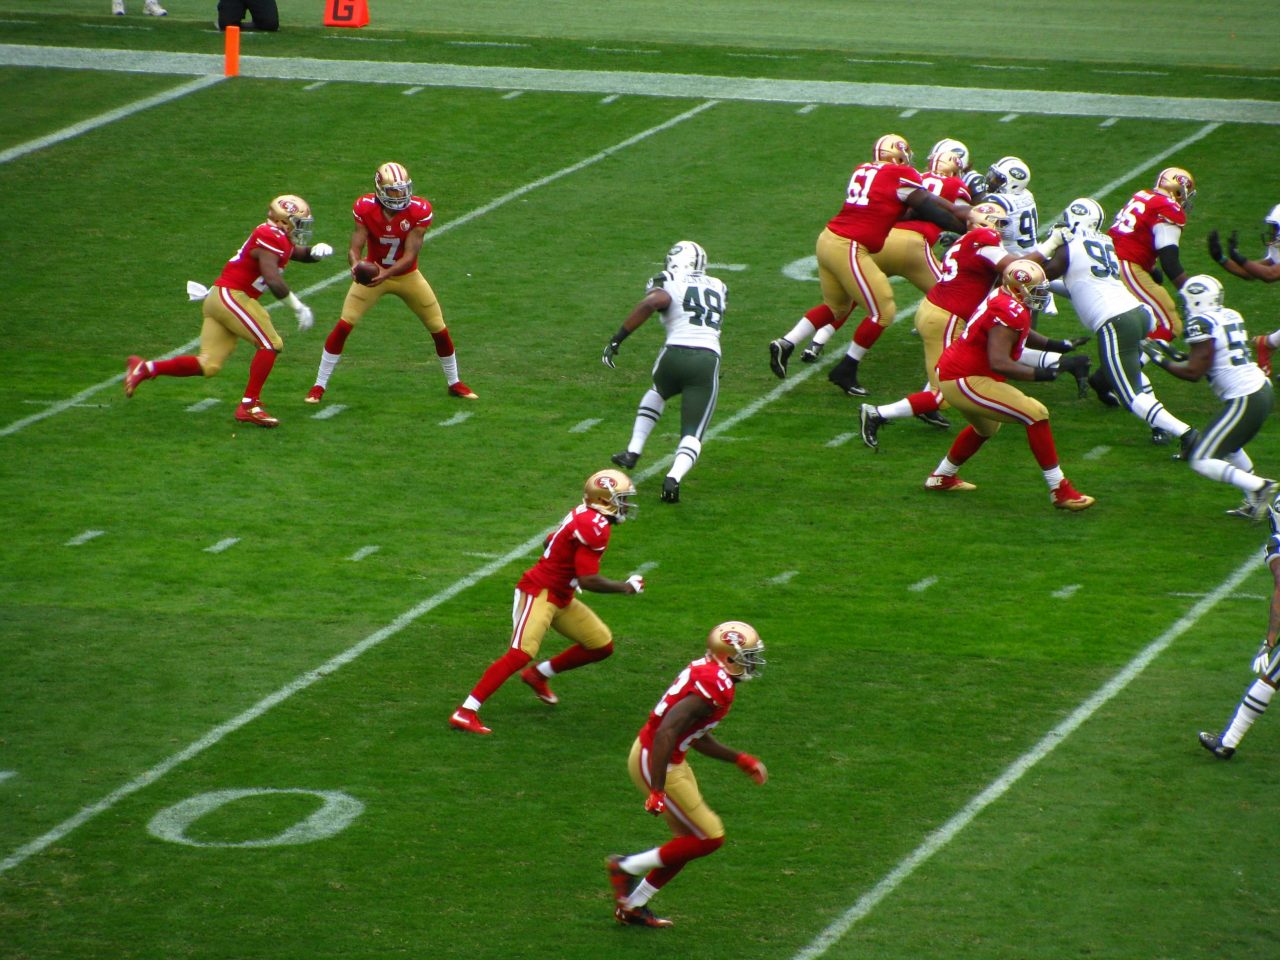 The NY Jets football team playing the San Francisco 49ers